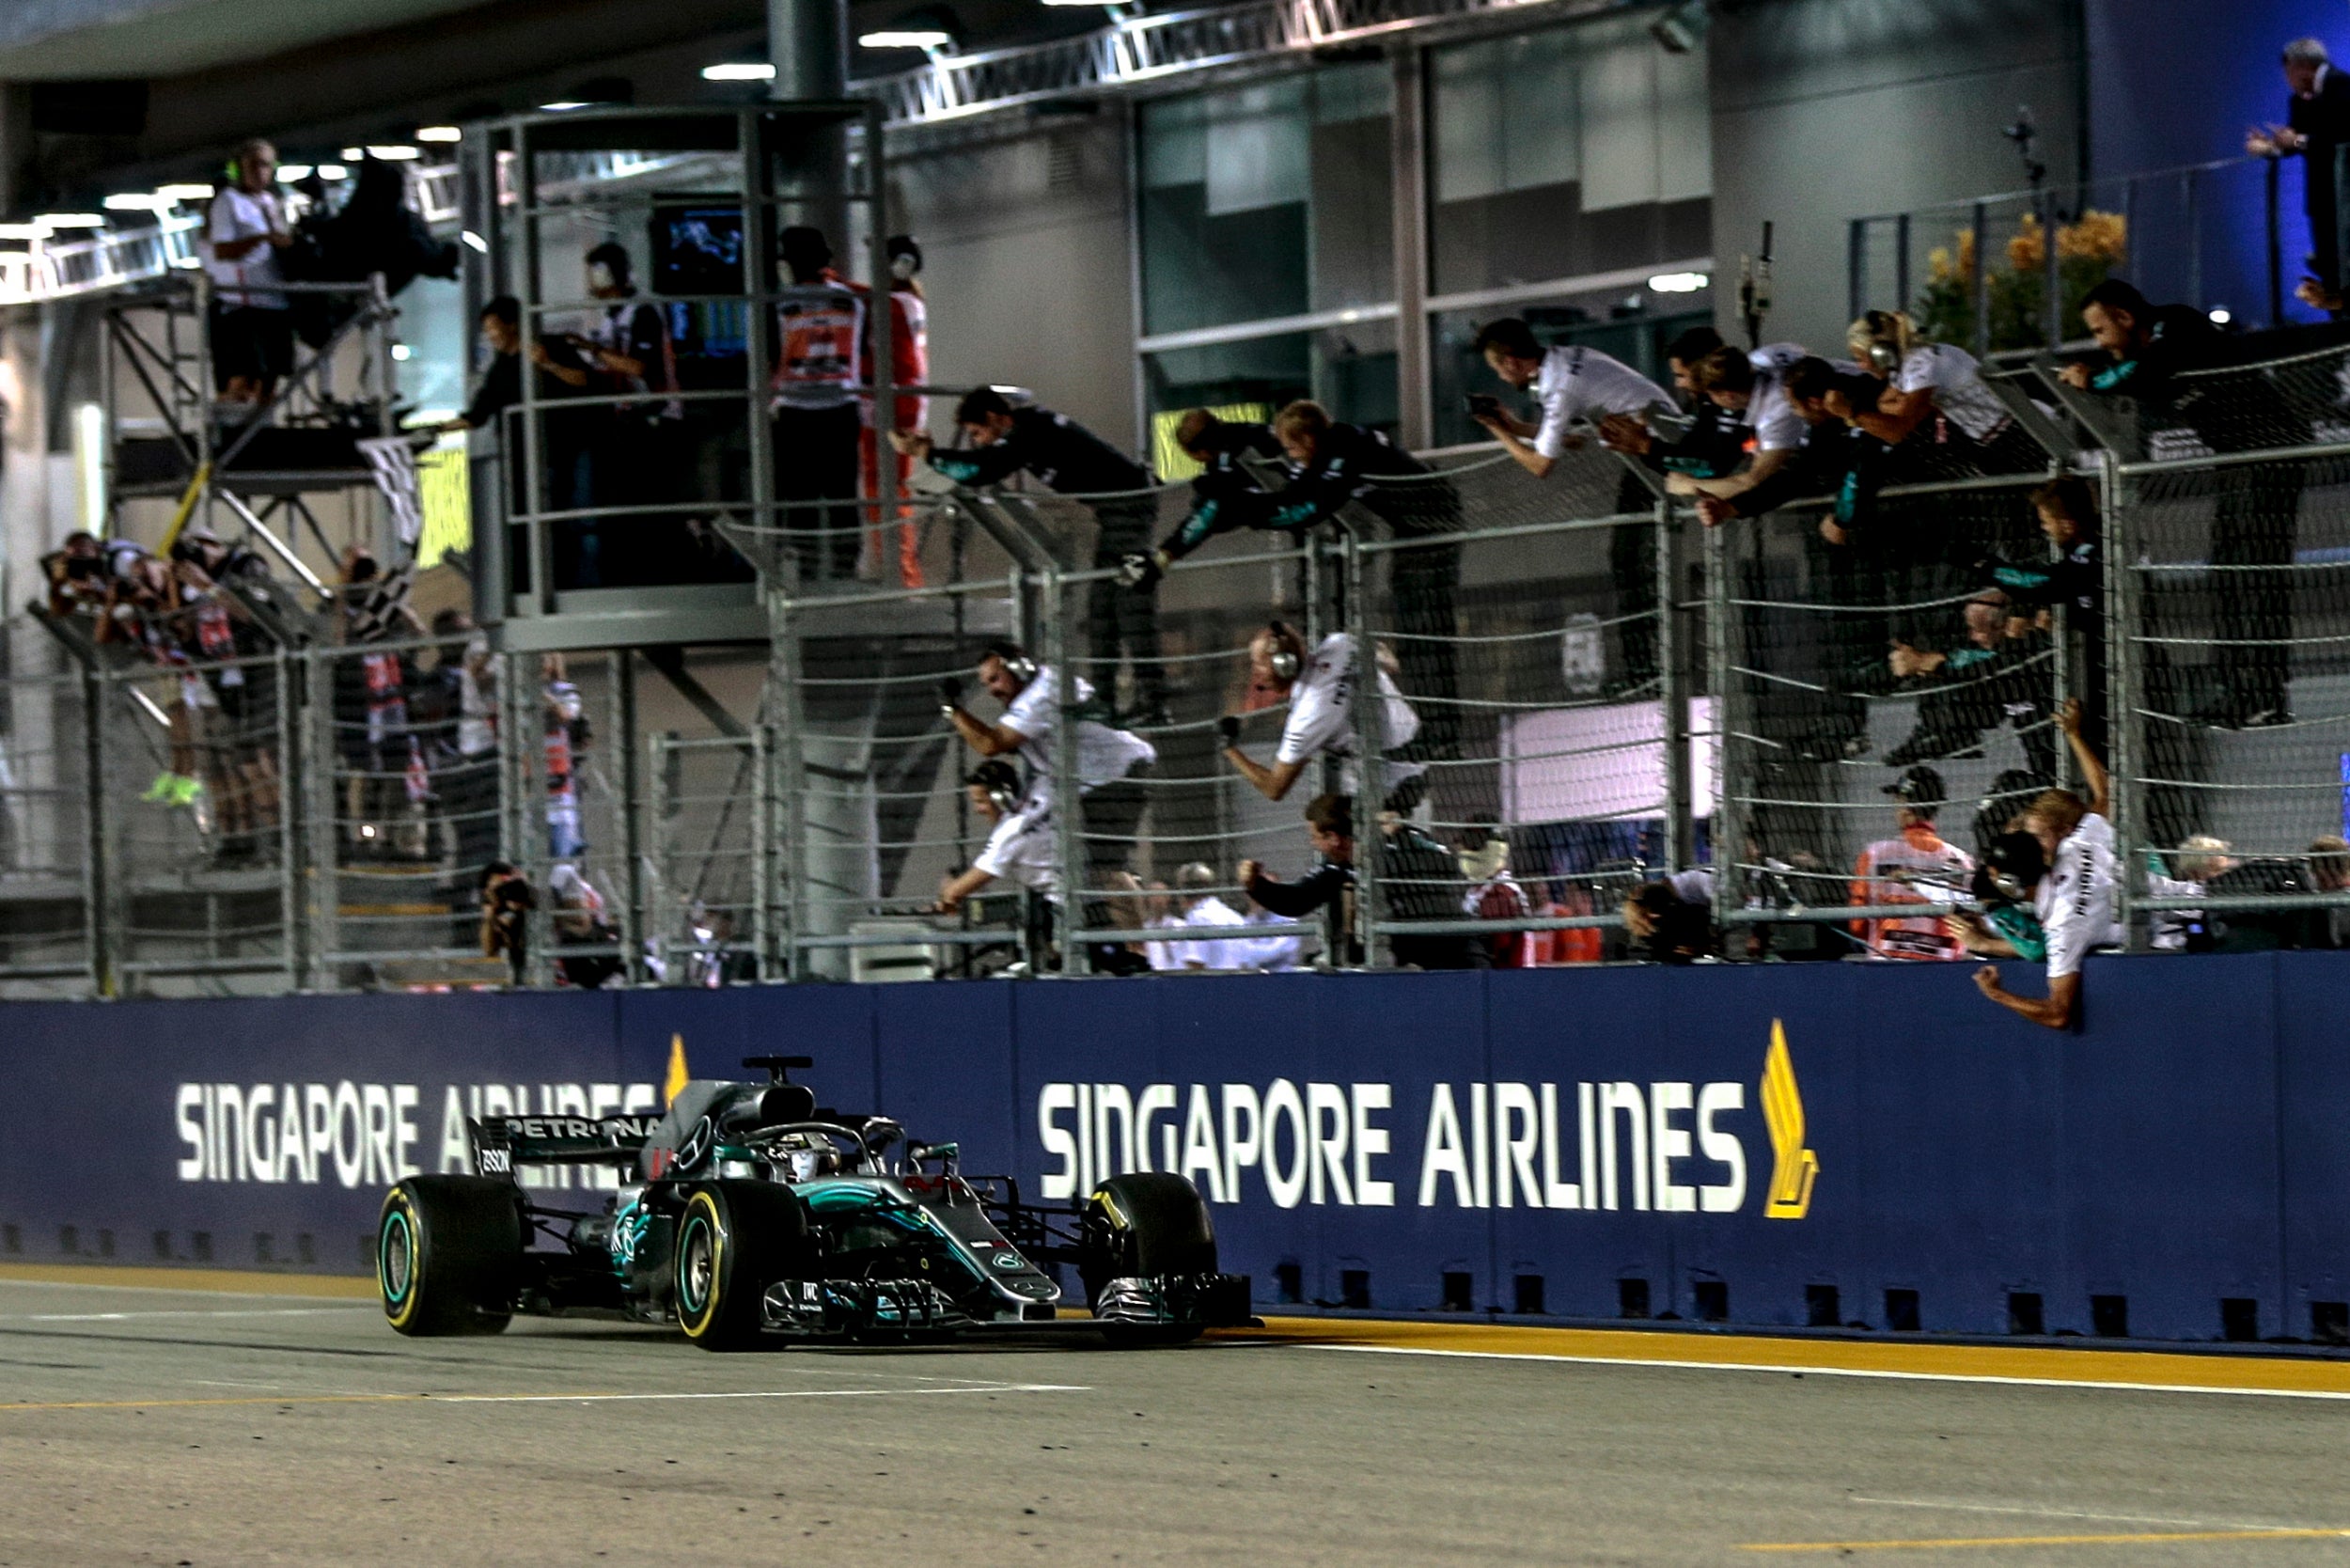 Hamilton crosses the line to take victory in Singapore